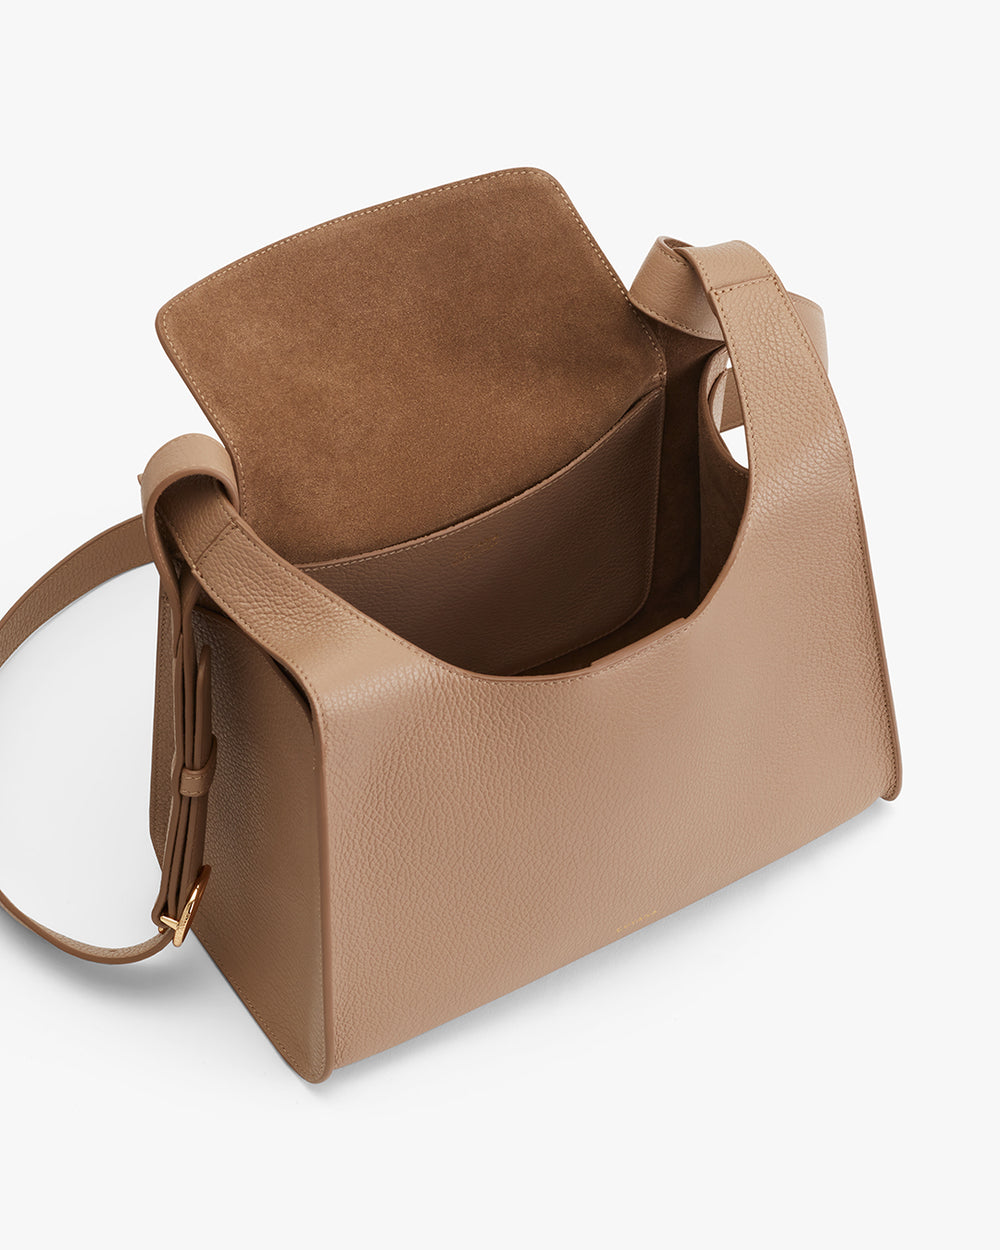 Open handbag with a flap and a shoulder strap.